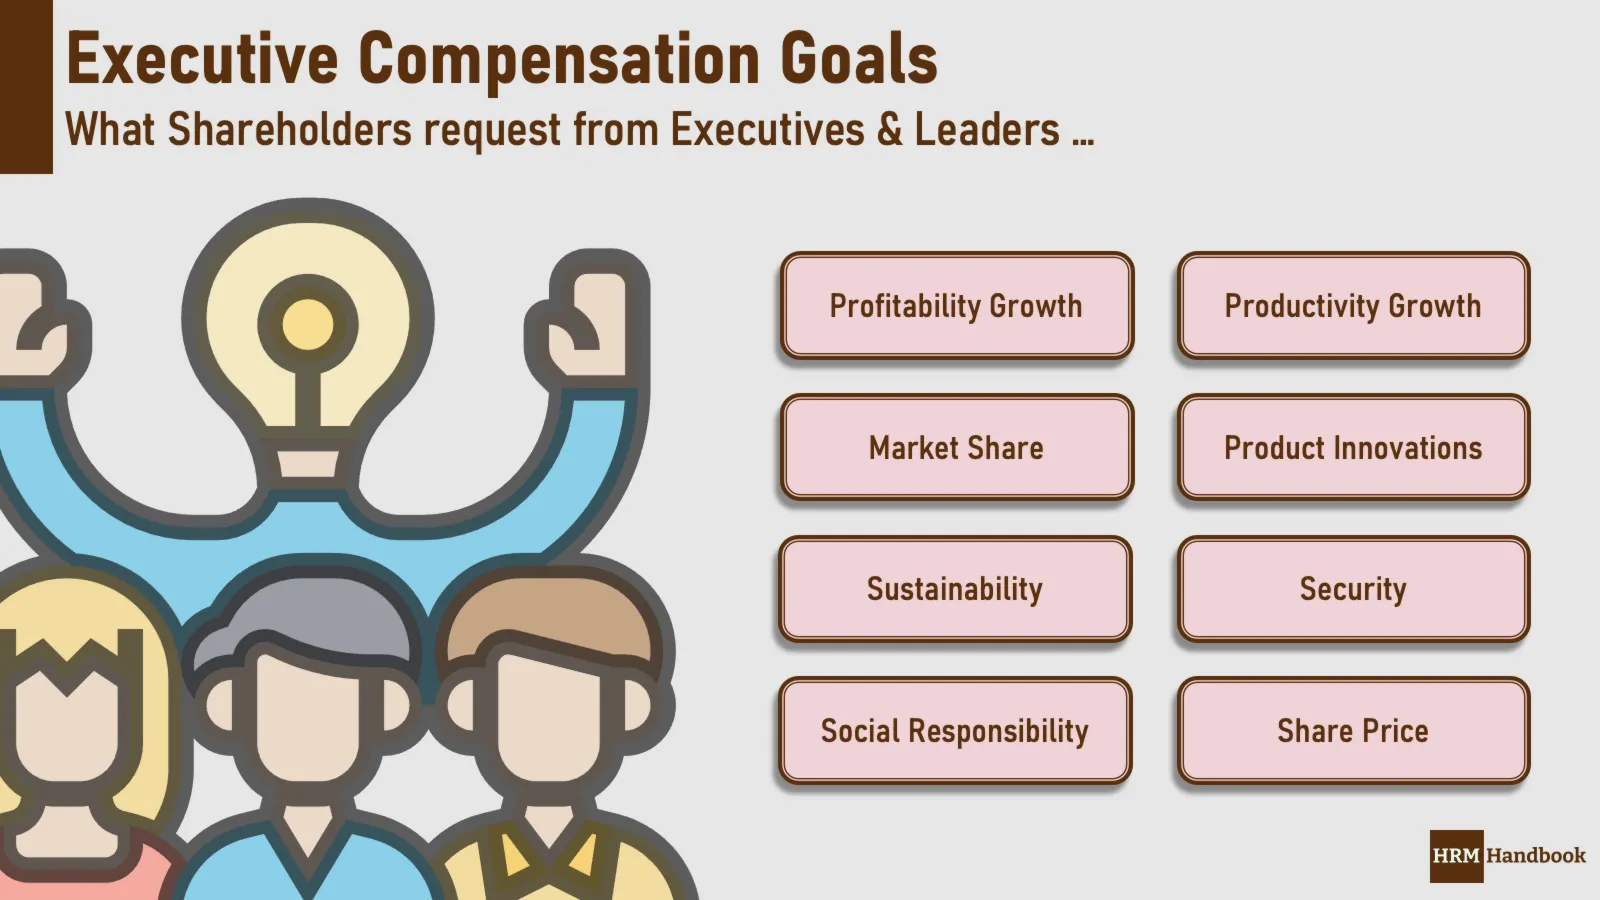 Executive Compensation Goals: What Shareholders request from Executives and Leaders